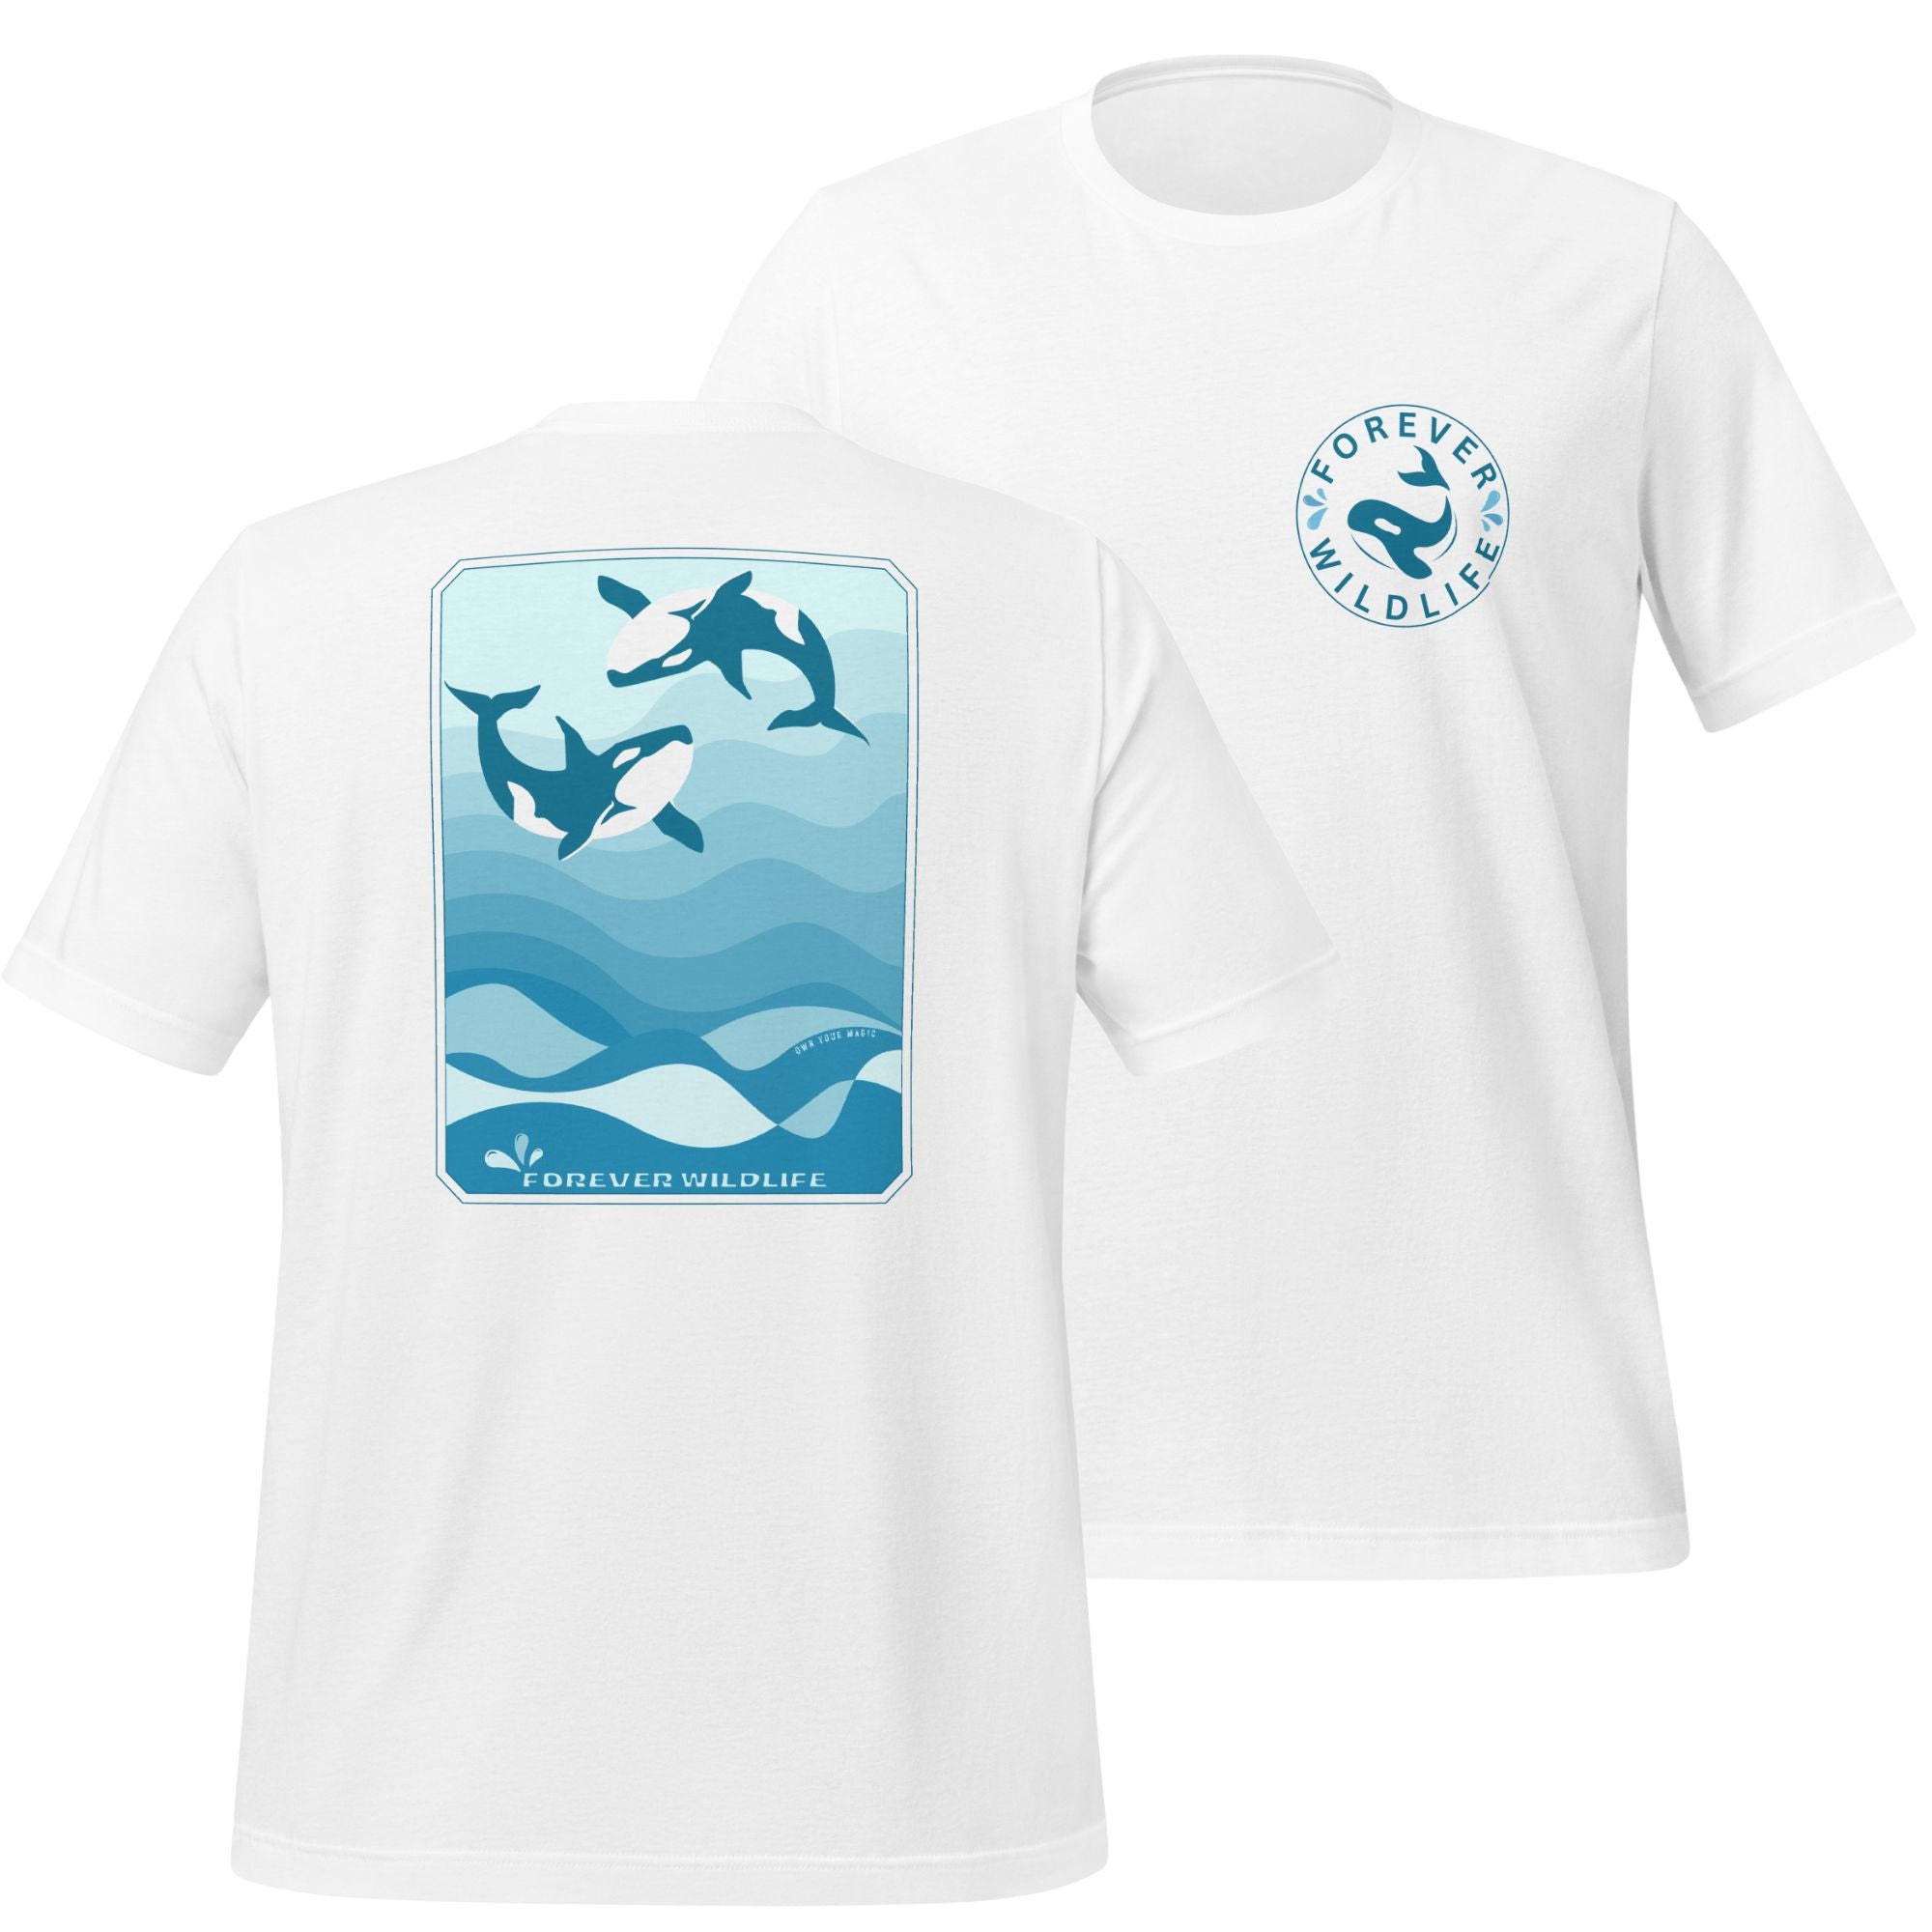 Orca Shirt, beautiful White T-Shirt with Killer Whales on the shirt by Forever Wildlife selling Wildlife T Shirts.